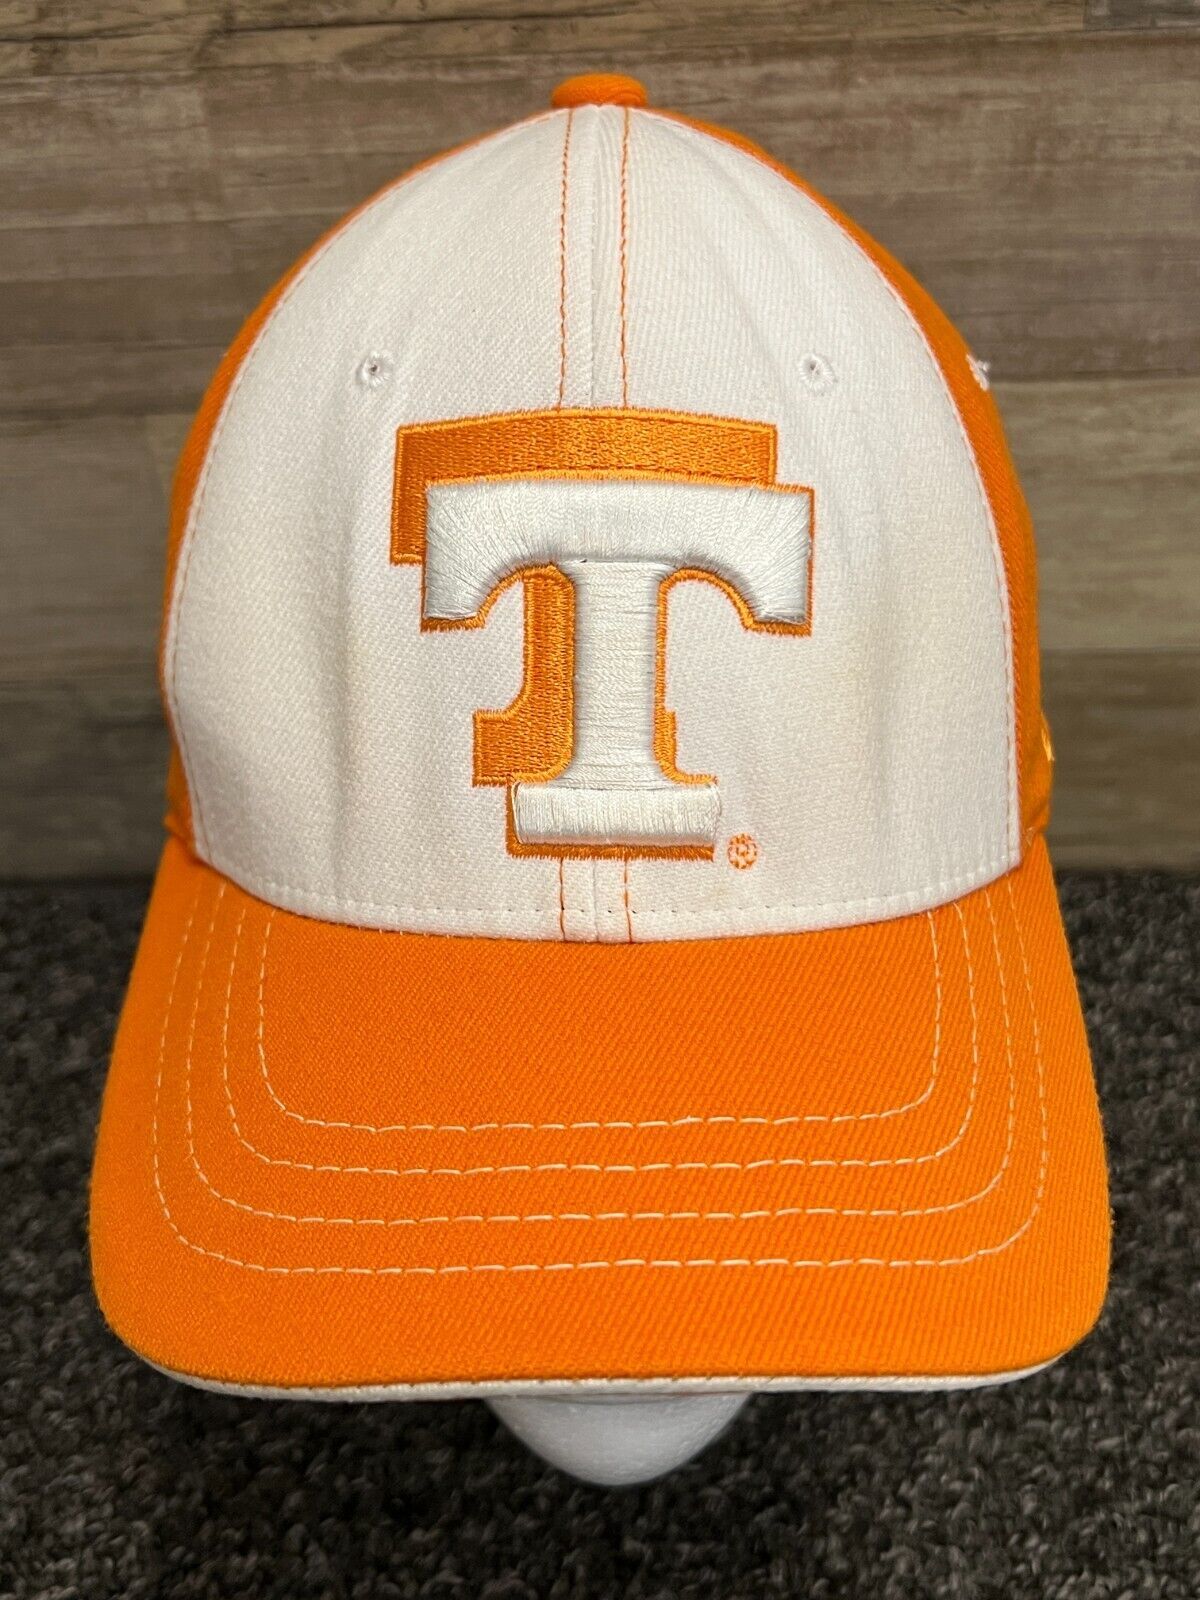 Primary image for Tennessee Vols Orange Zephyr ZFit M/L Fitted Ball Cap Hat ~ NWOT!